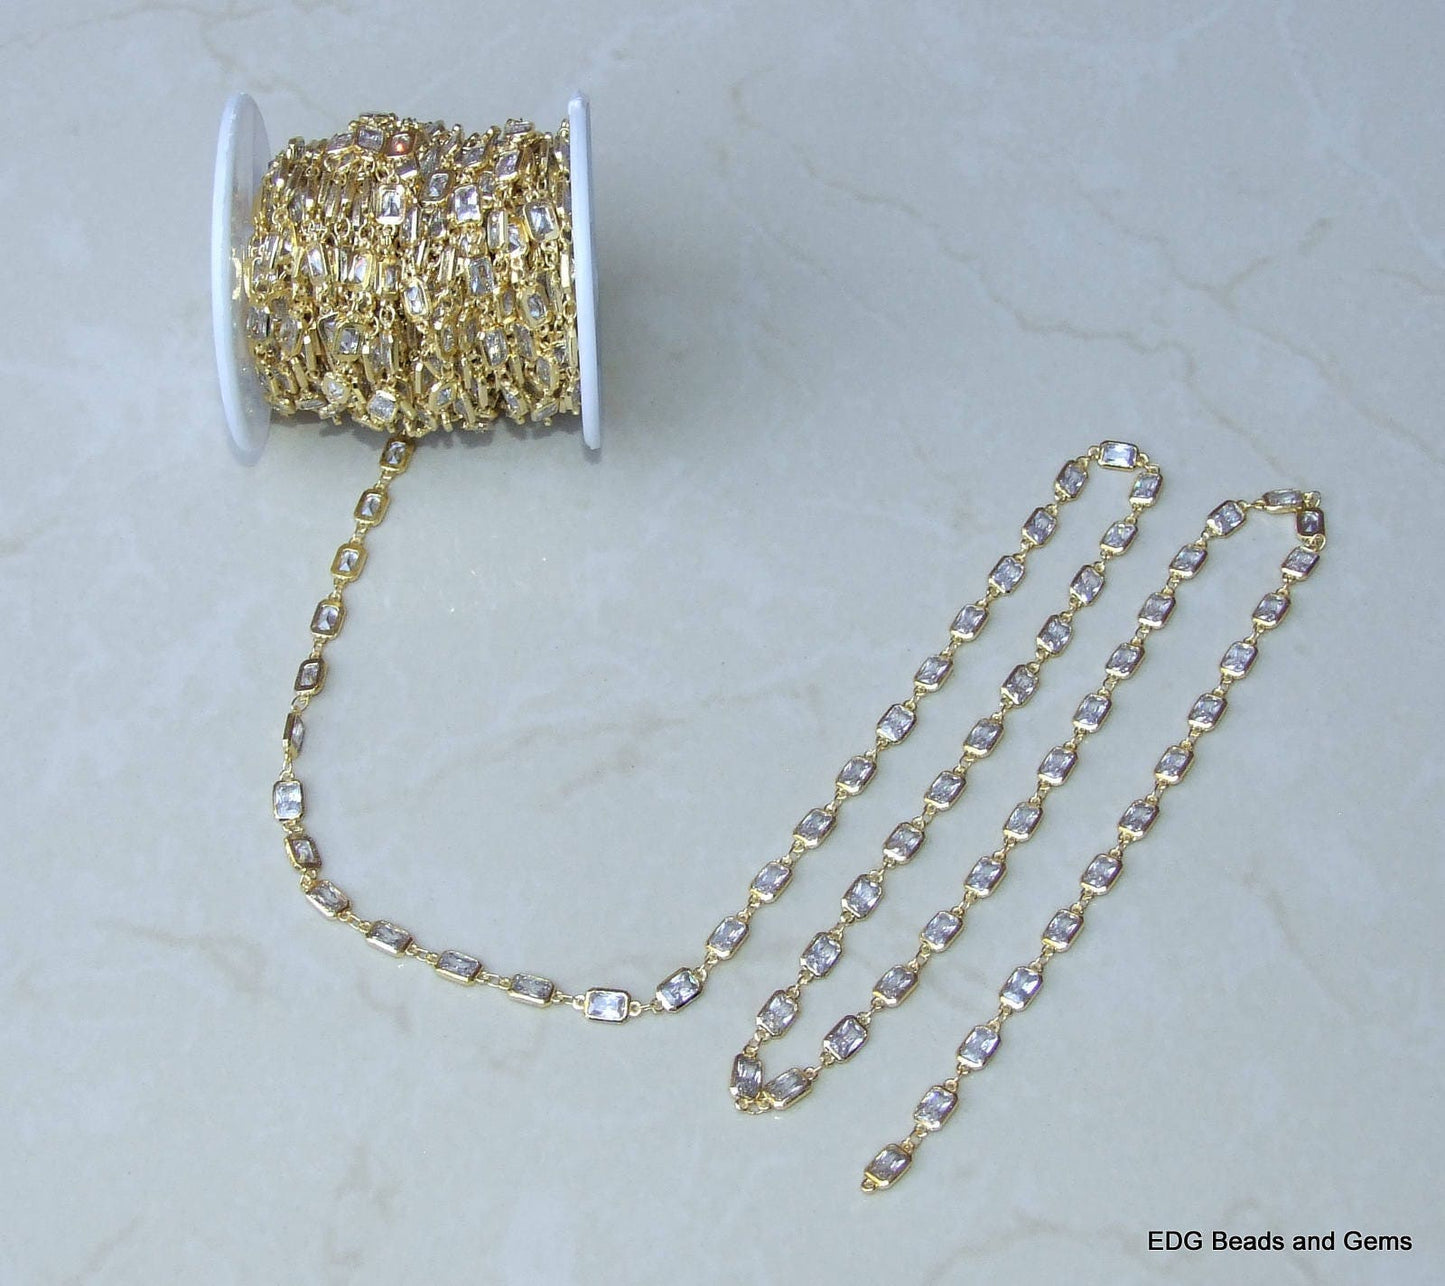 CZ Crystal Rosary Chain, Bulk Chain, Rectangle Glass Beads, Beaded Chain, Body Chain Jewelry, Gold Chain, Necklace Chain, Belly Chain